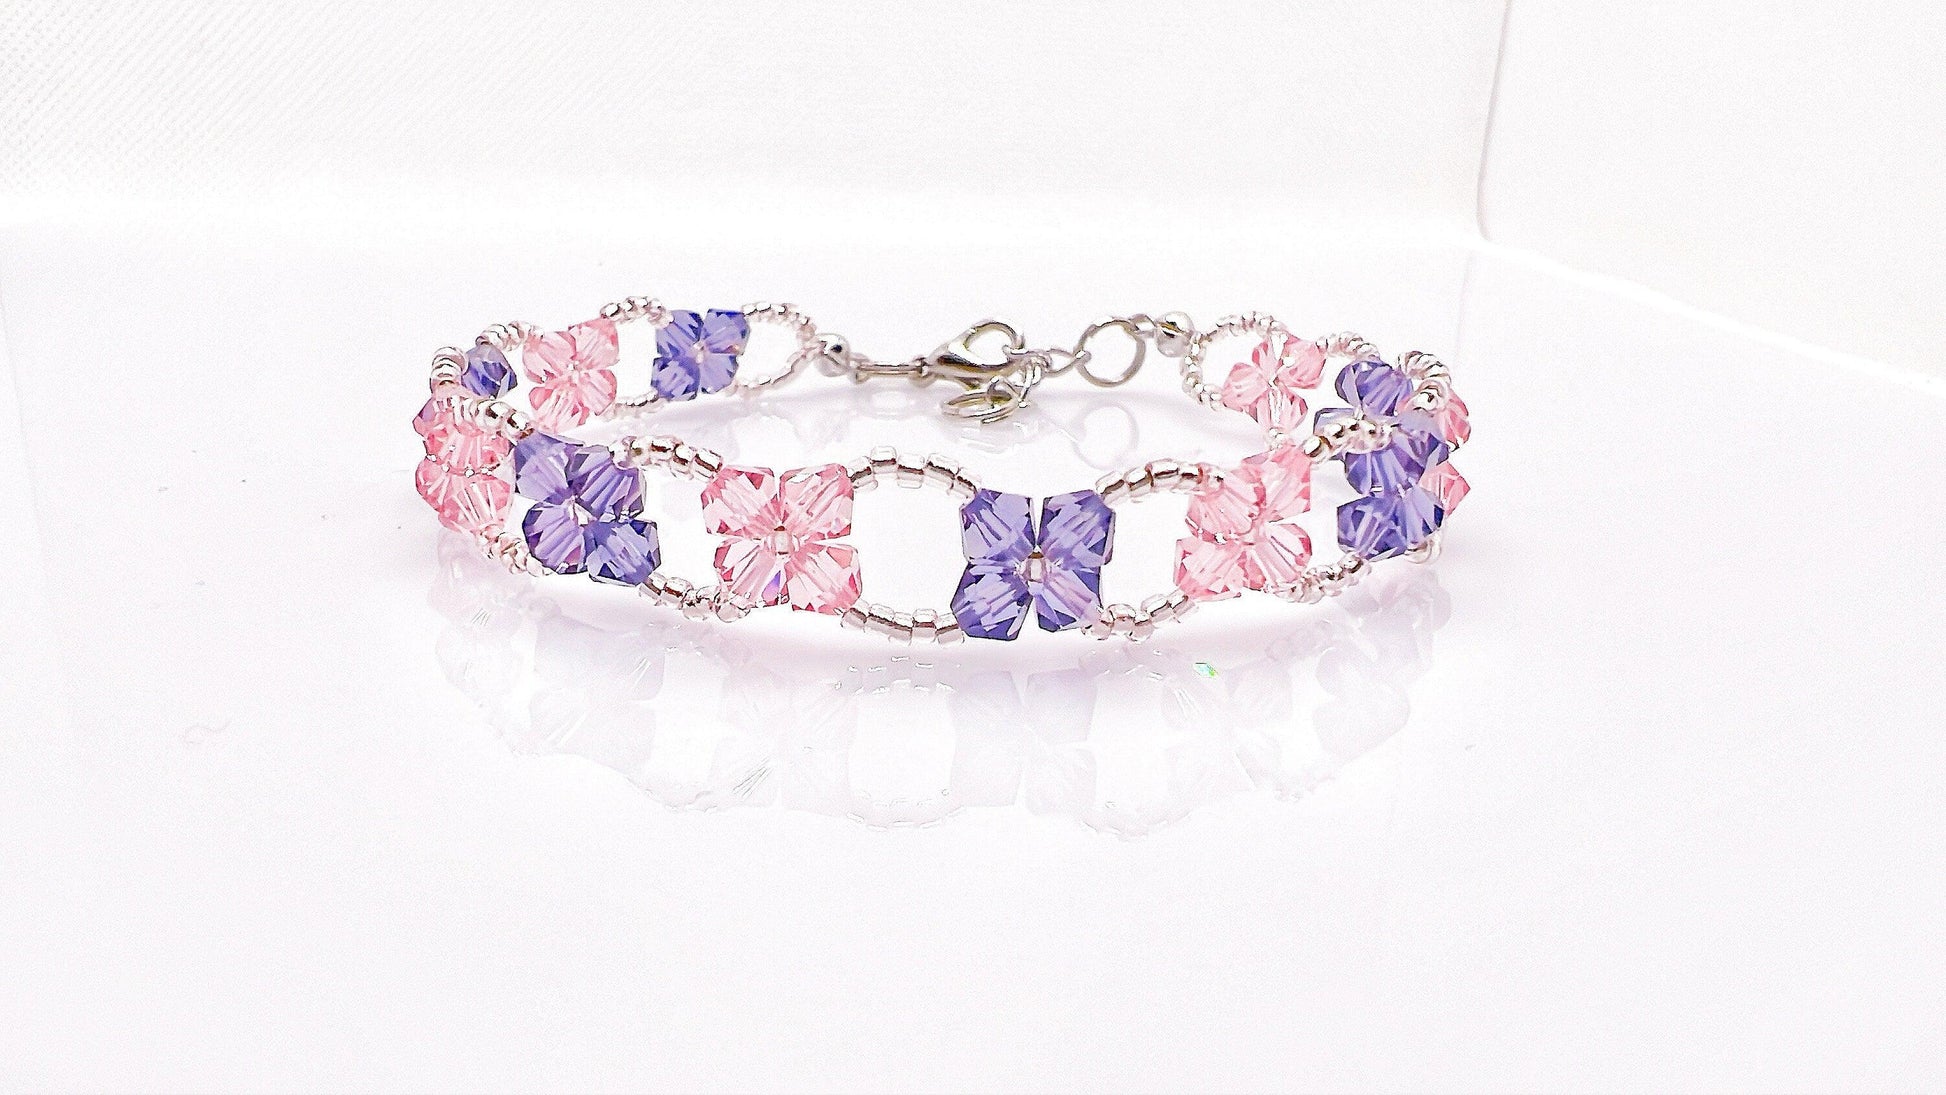 Pink Lavender Forget Me Not Bracelet, Flower Jewelry, Beaded Remembrance Bracelet, Botanic Nature Jewelry, Bridal Jewelry, Gift for mom